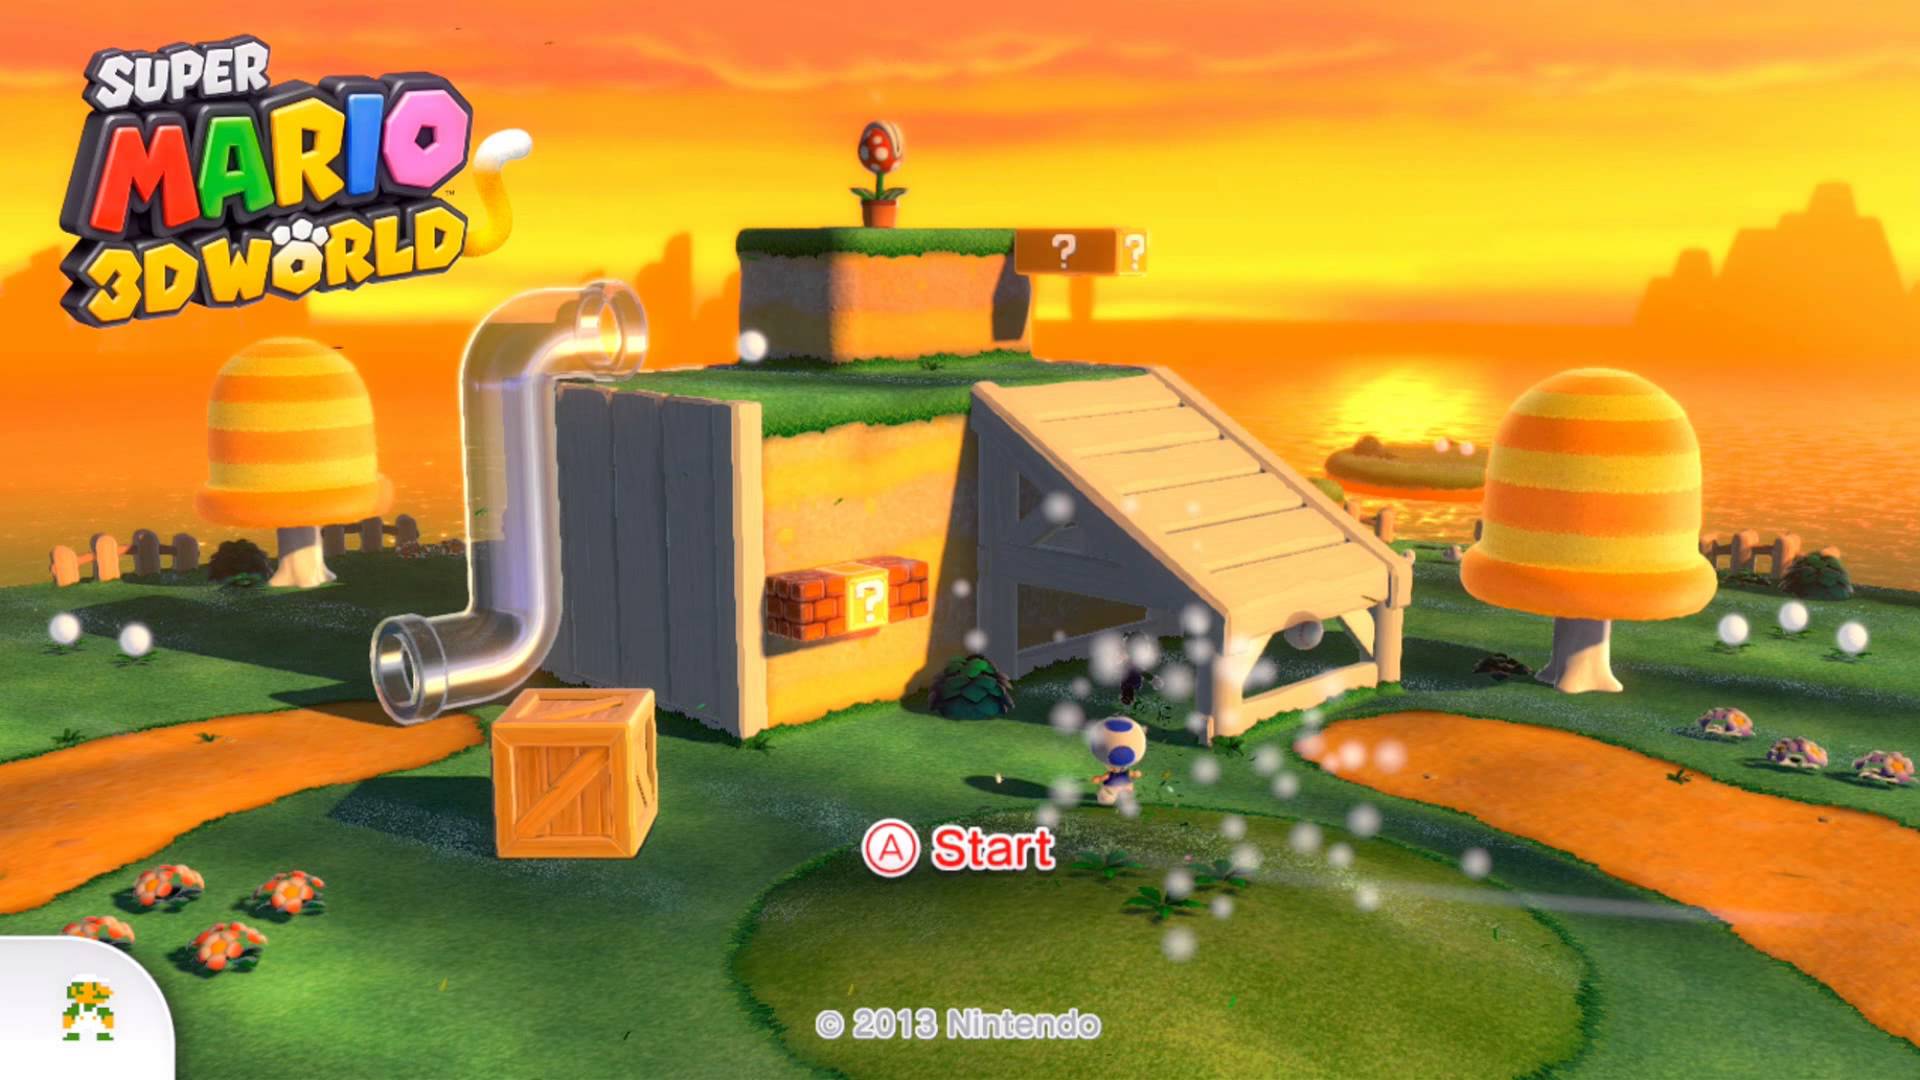 Collection of Super Mario 3d World Wallpapers